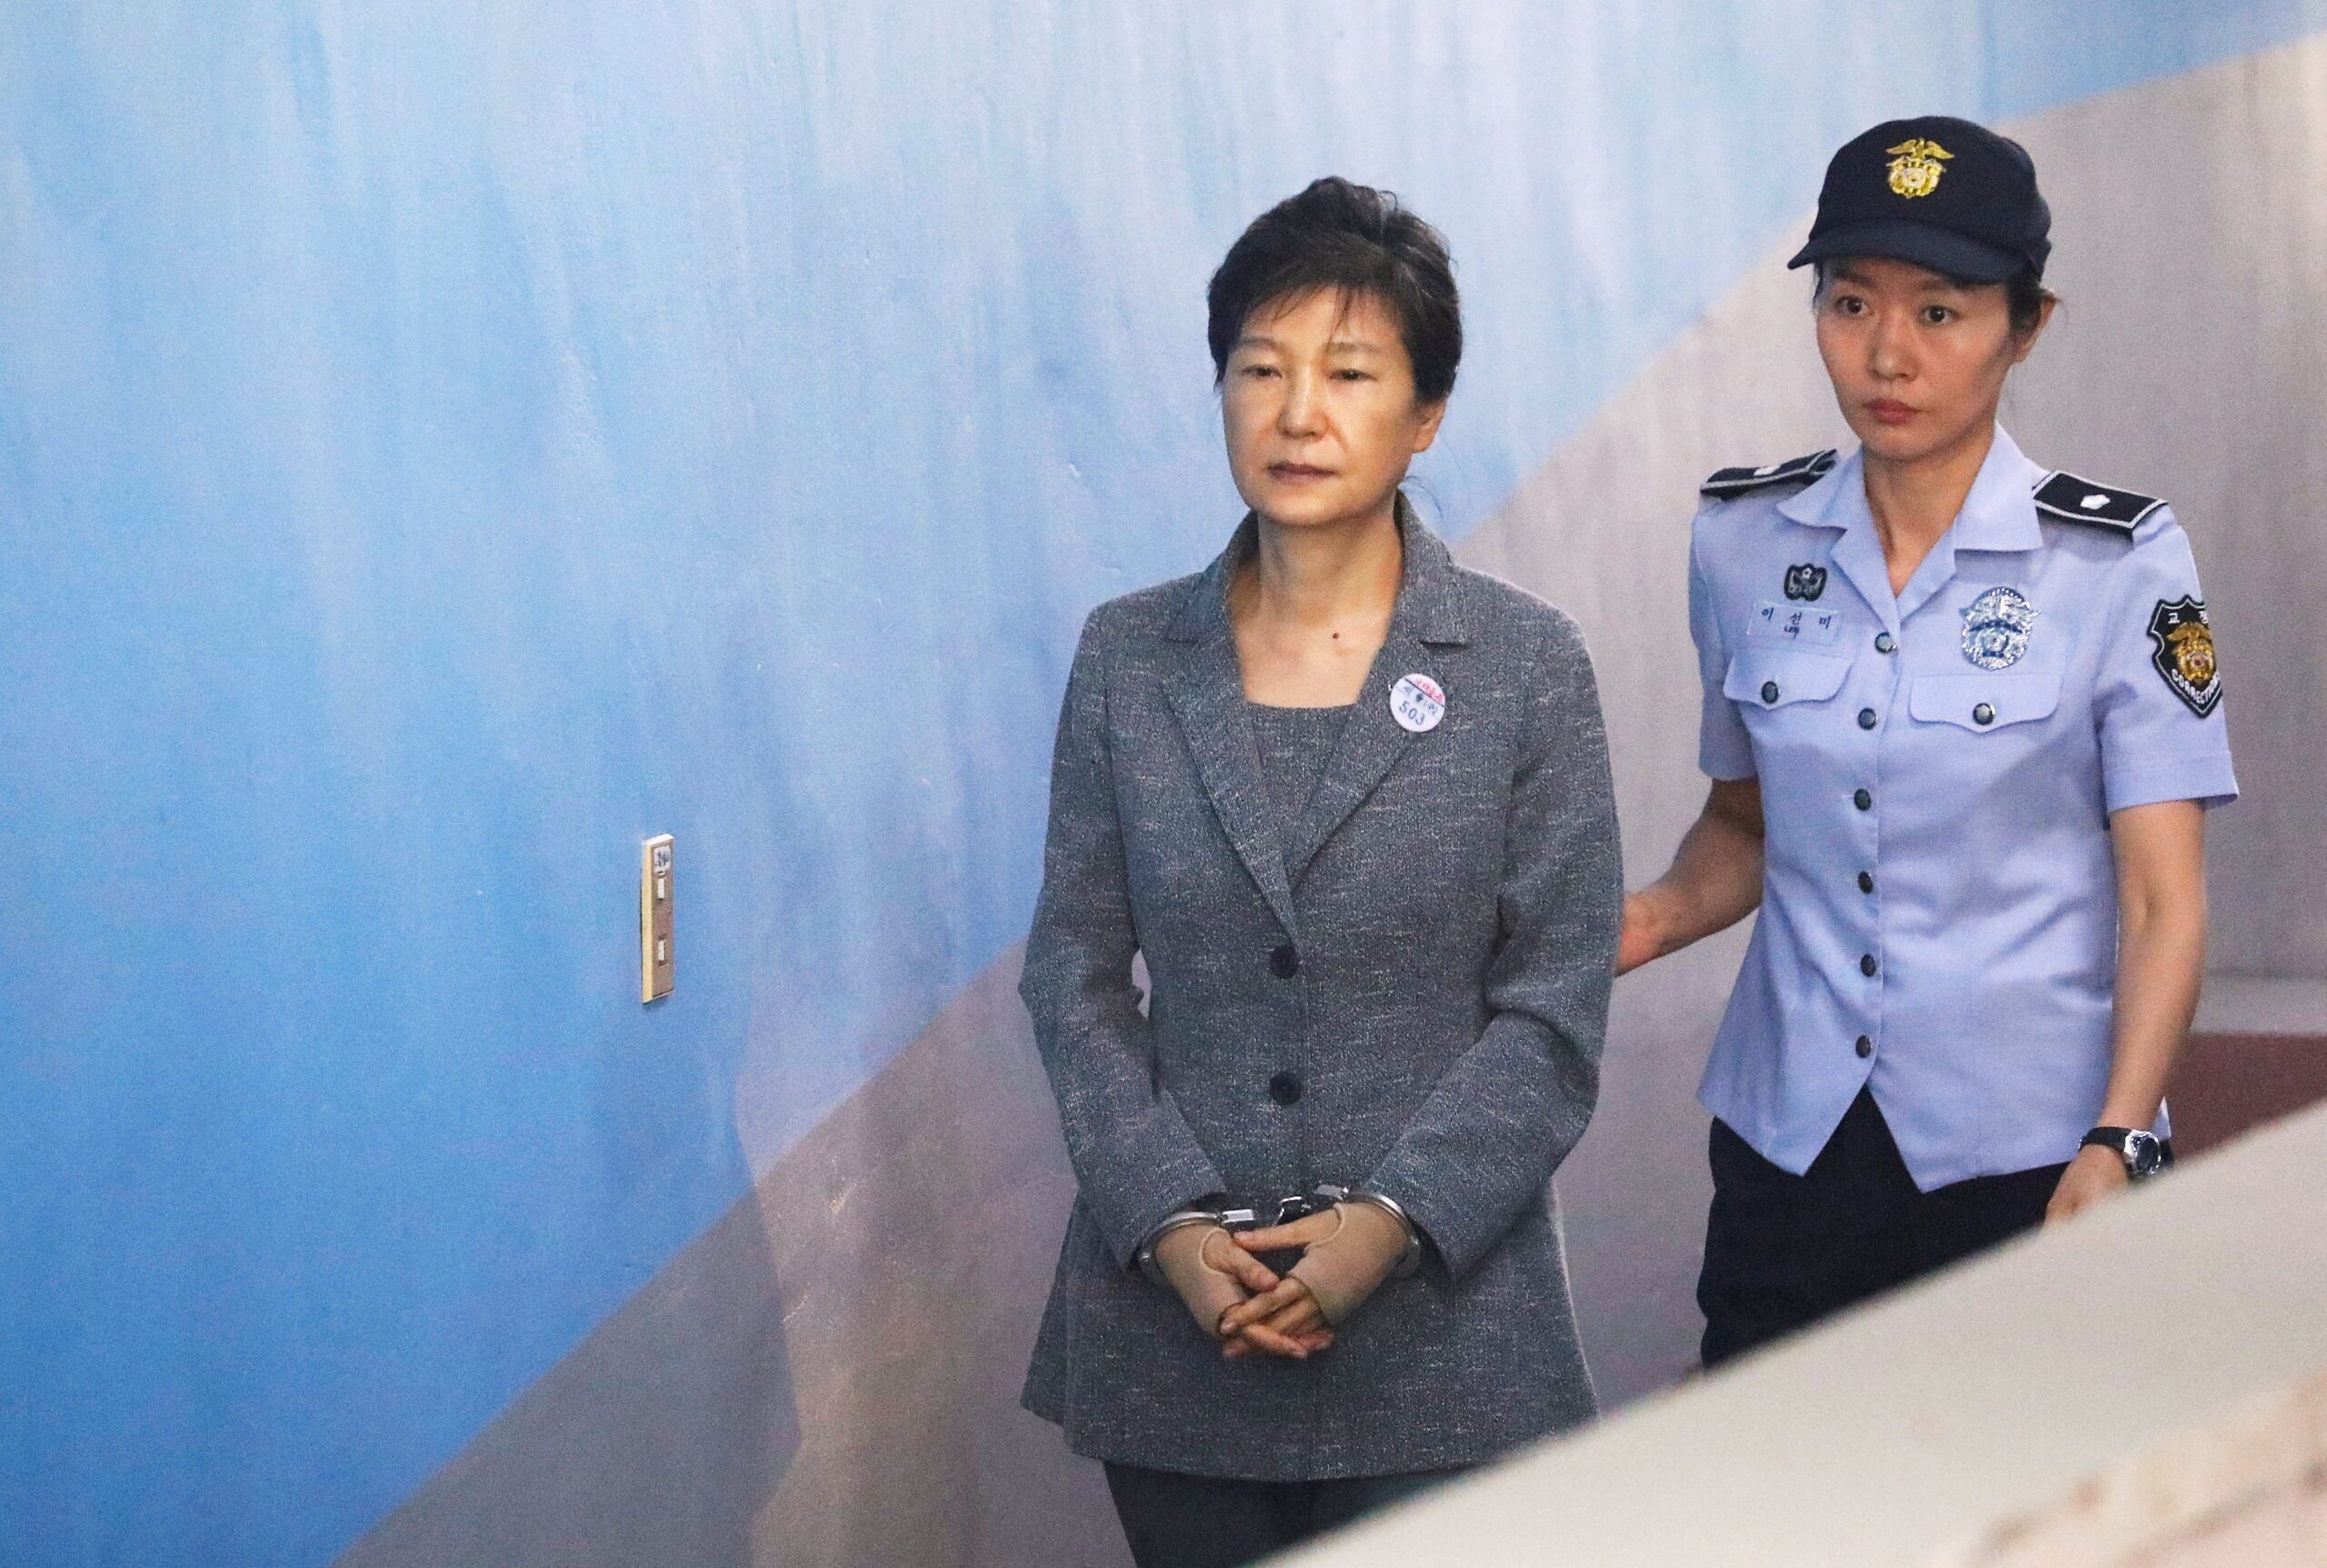 South Korea’s disgraced ex-president Park freed after nearly 5 years in prison